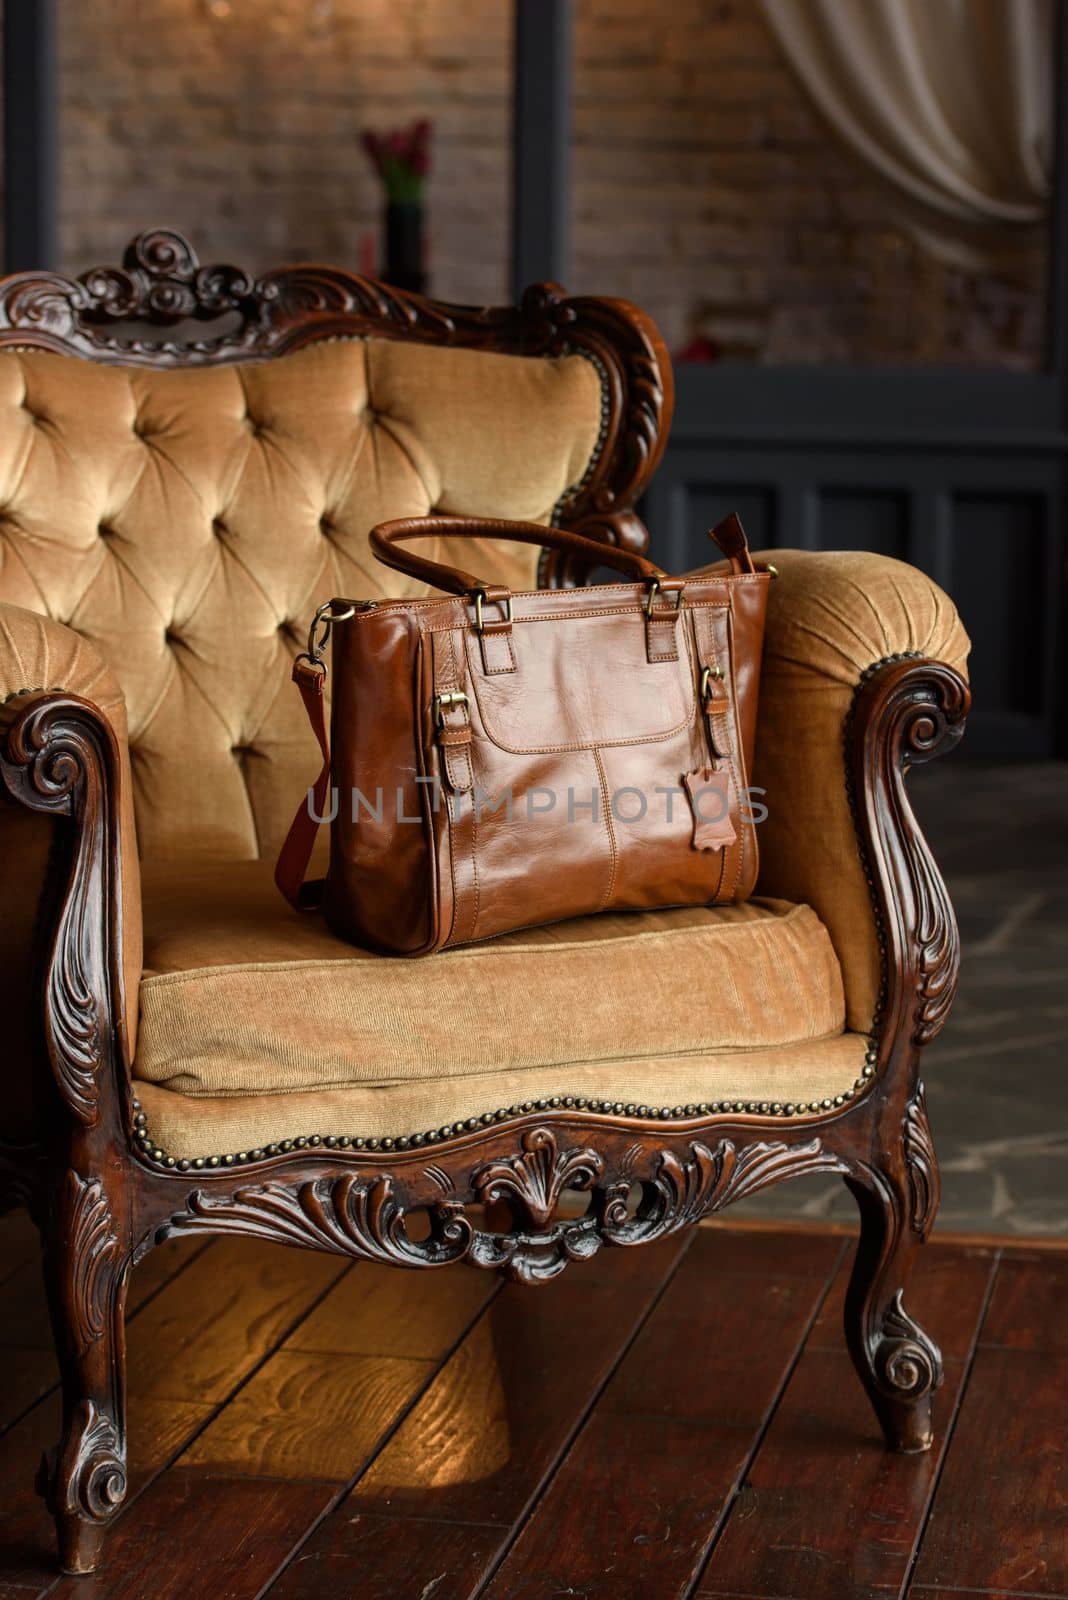 close-up photo of brown leather bag on a yellow velor vintage armchair. by Ashtray25